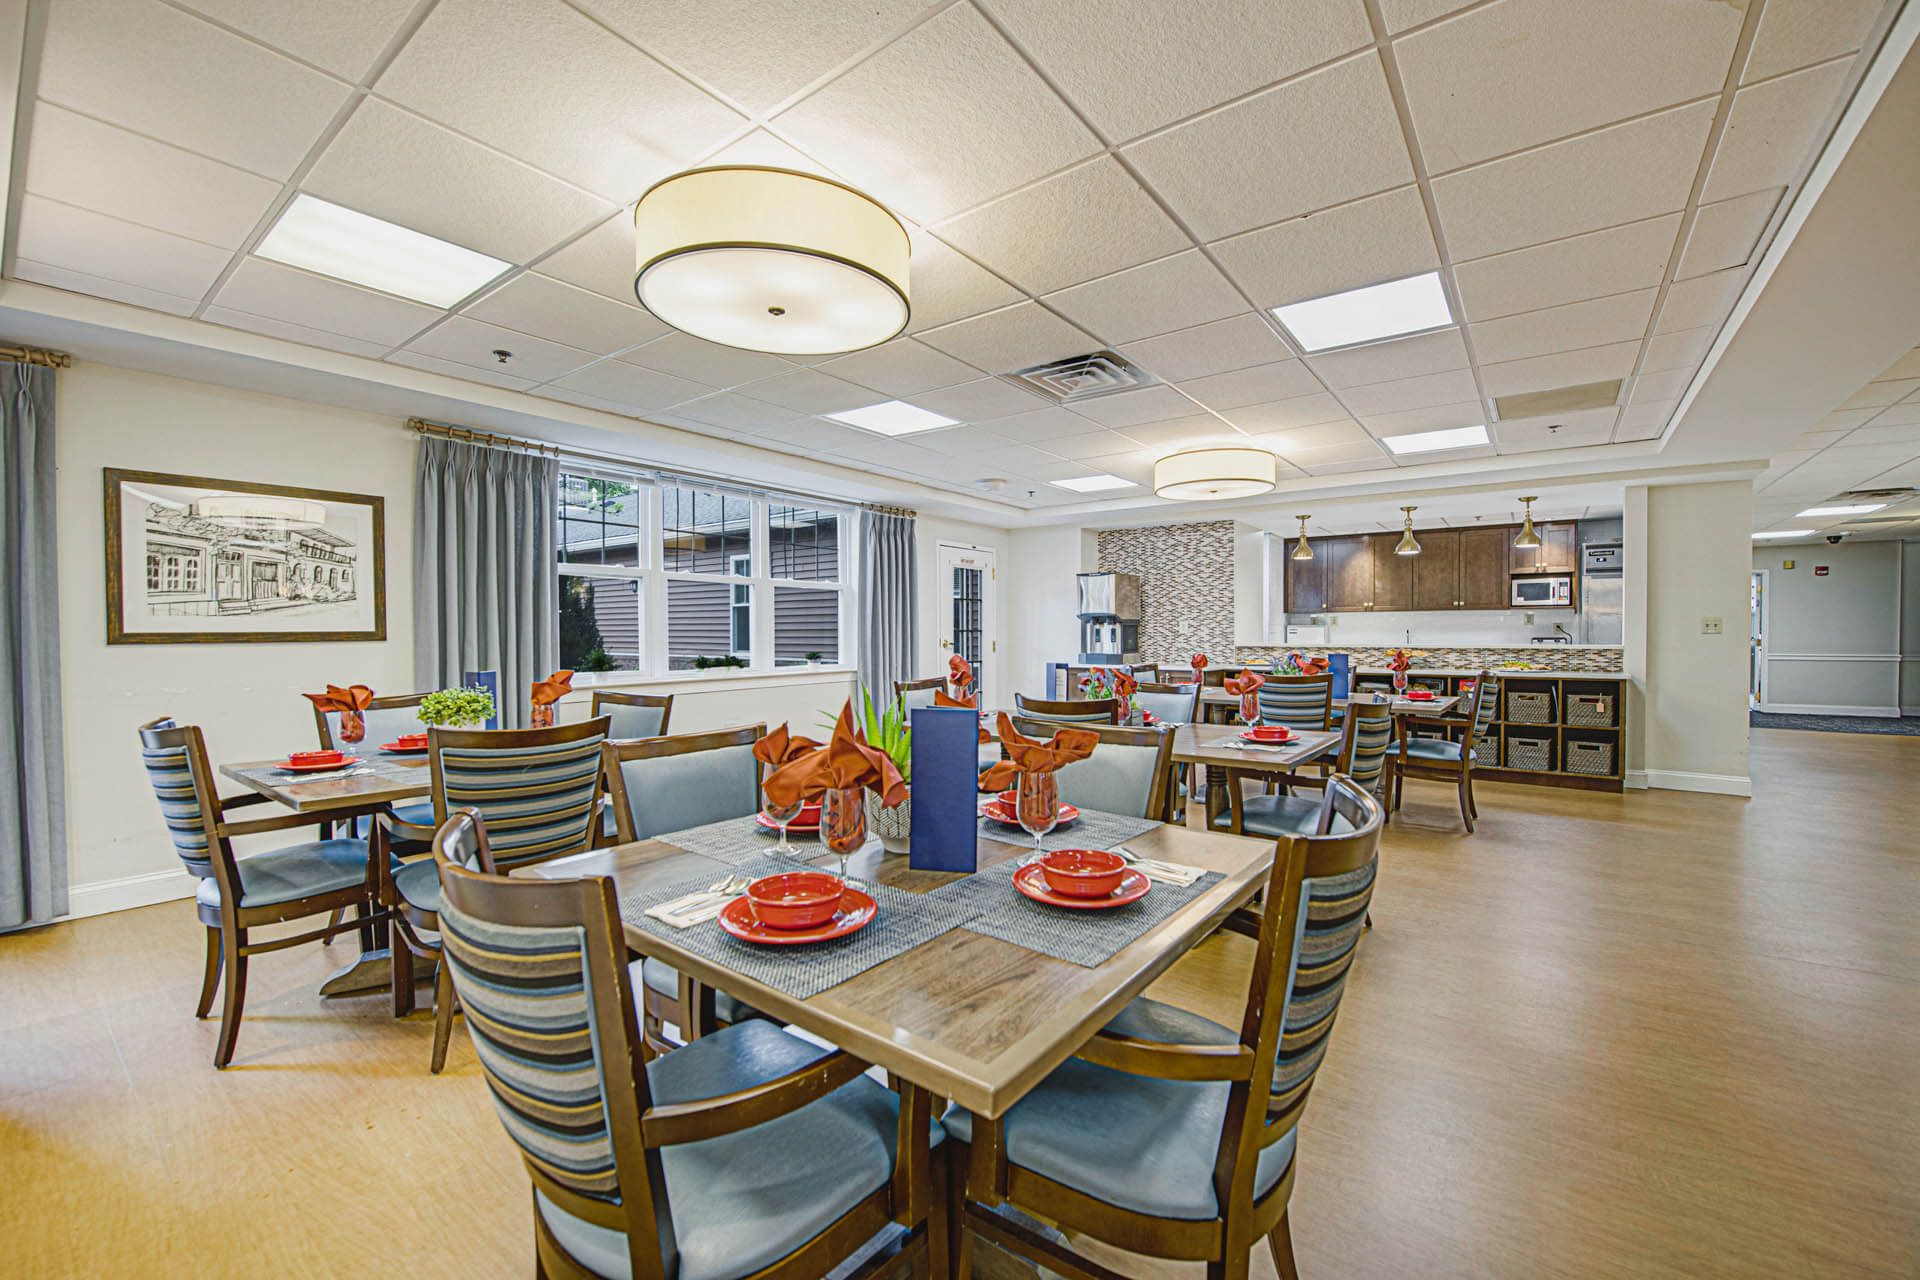 Interior view of Woodbury Mews senior living community featuring dining room and furniture.